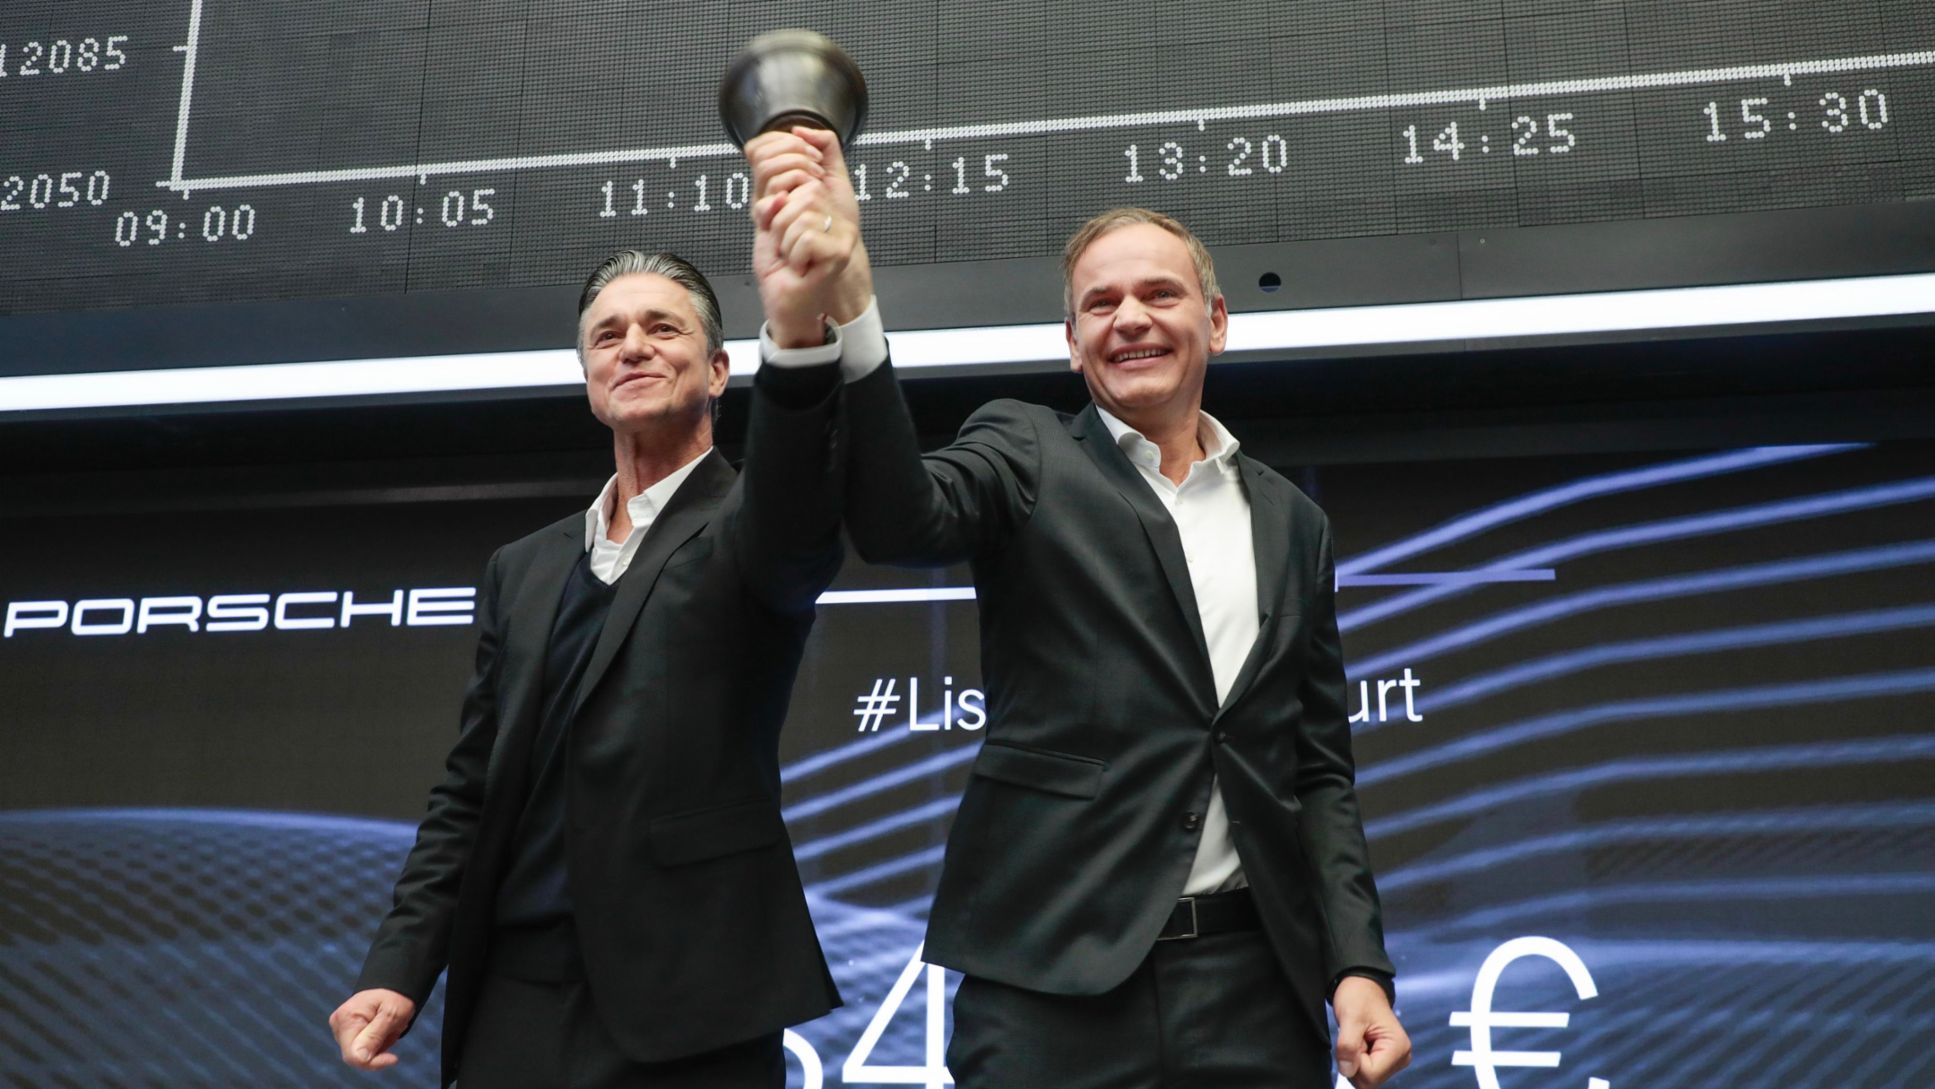 Lutz Meschke, Deputy Chairman of the Executive Board and Member of the Executive Board for Finance and IT at Porsche AG, Oliver Blume, Chairman of the Executive Board of Porsche AG, l-r, Frankfurt Stock Exchange, IPO, Frankfurt am Main, Germany, 2022, Porsche AG